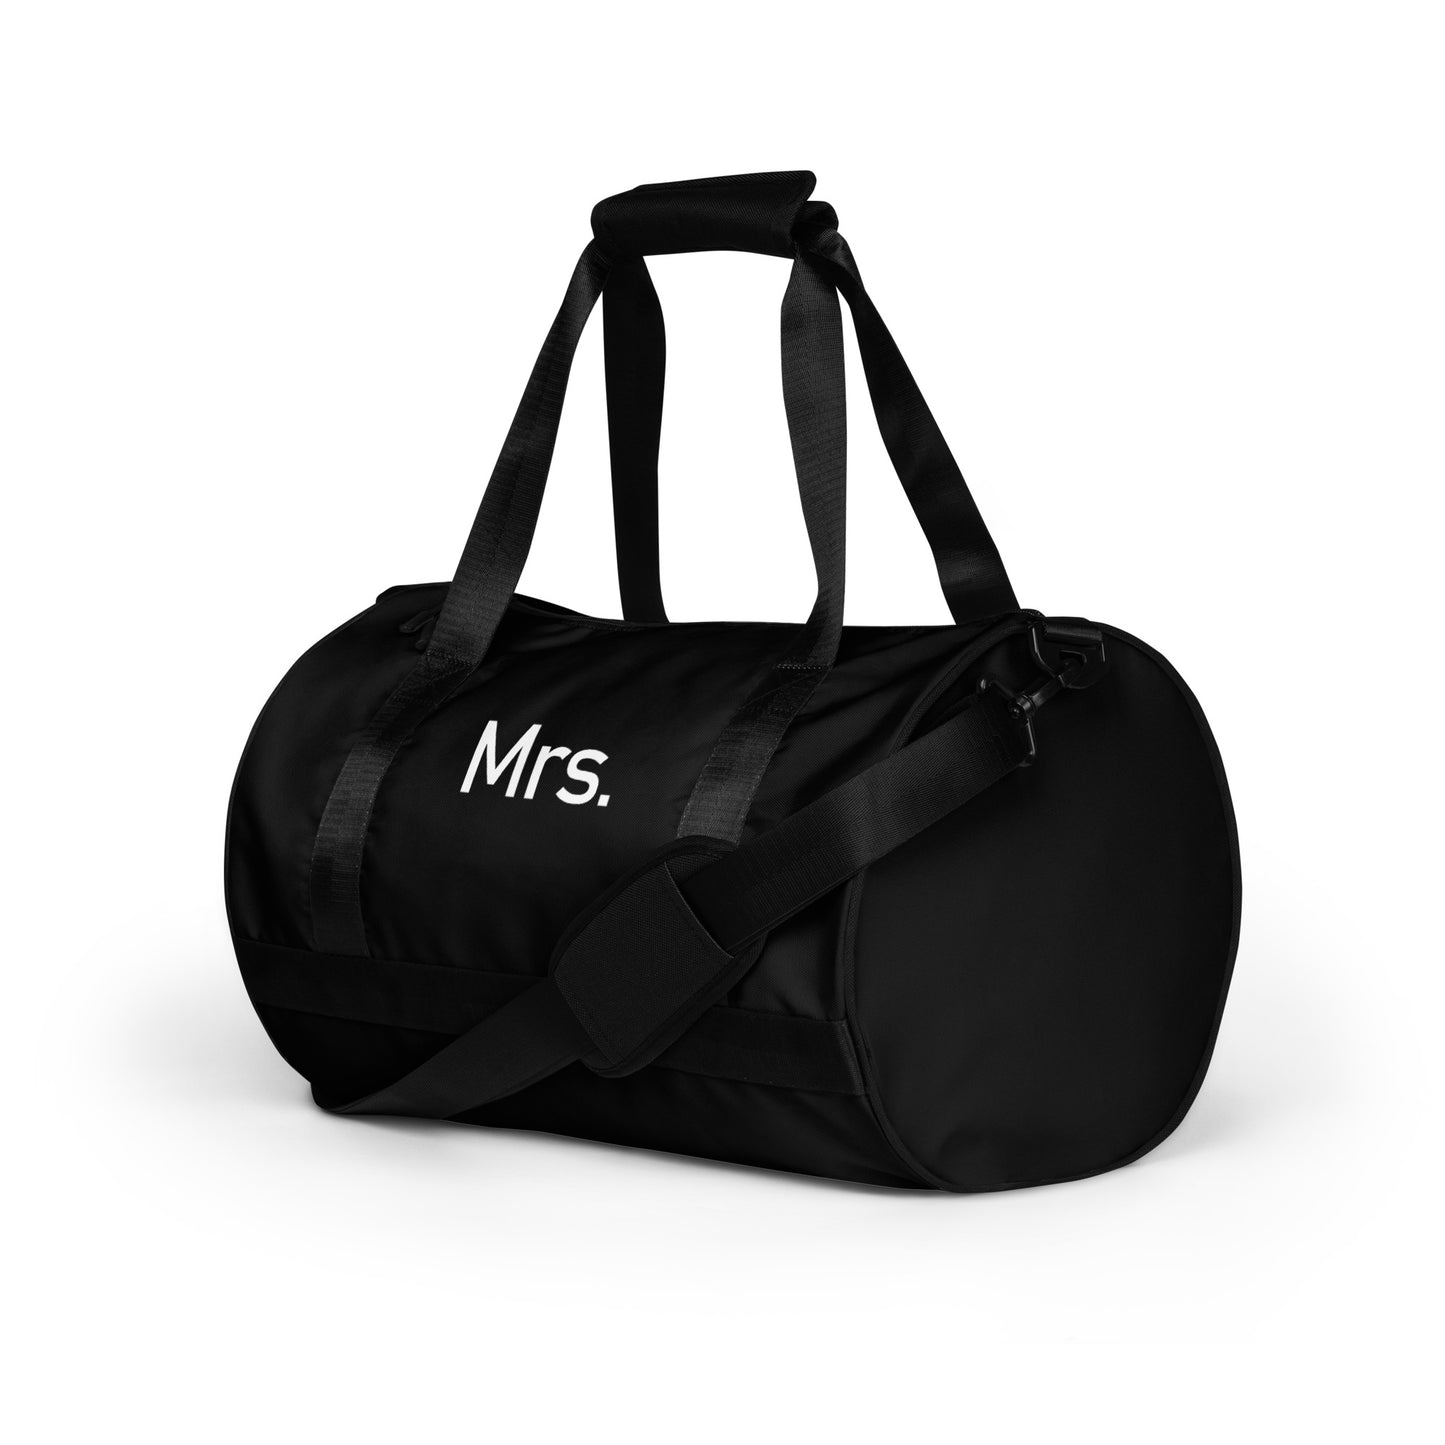 Mrs. - Sustainably Made Gym Bag